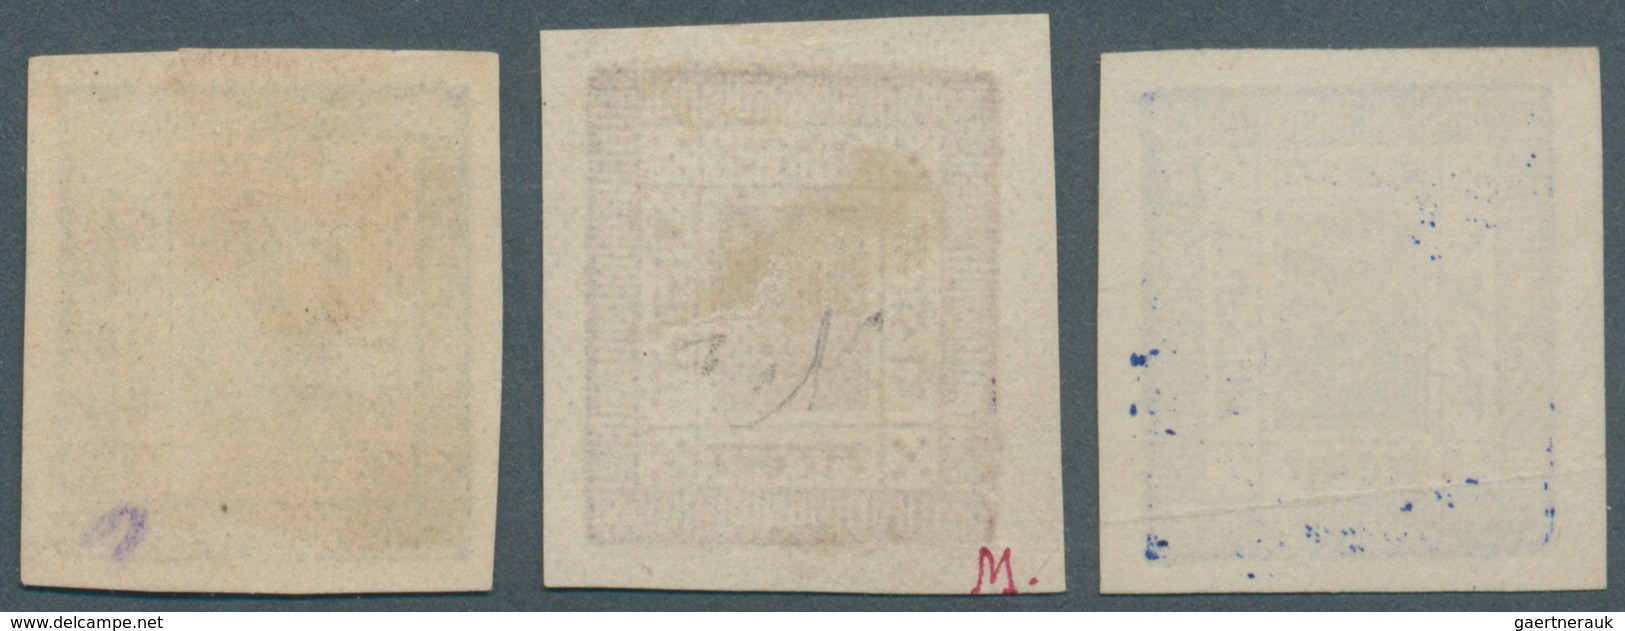 Nepal: 1881, First Issue, 1 A. Ultramarine, 2 A Bright-purple And 4 A Yellow-green On White Wove Eur - Nepal